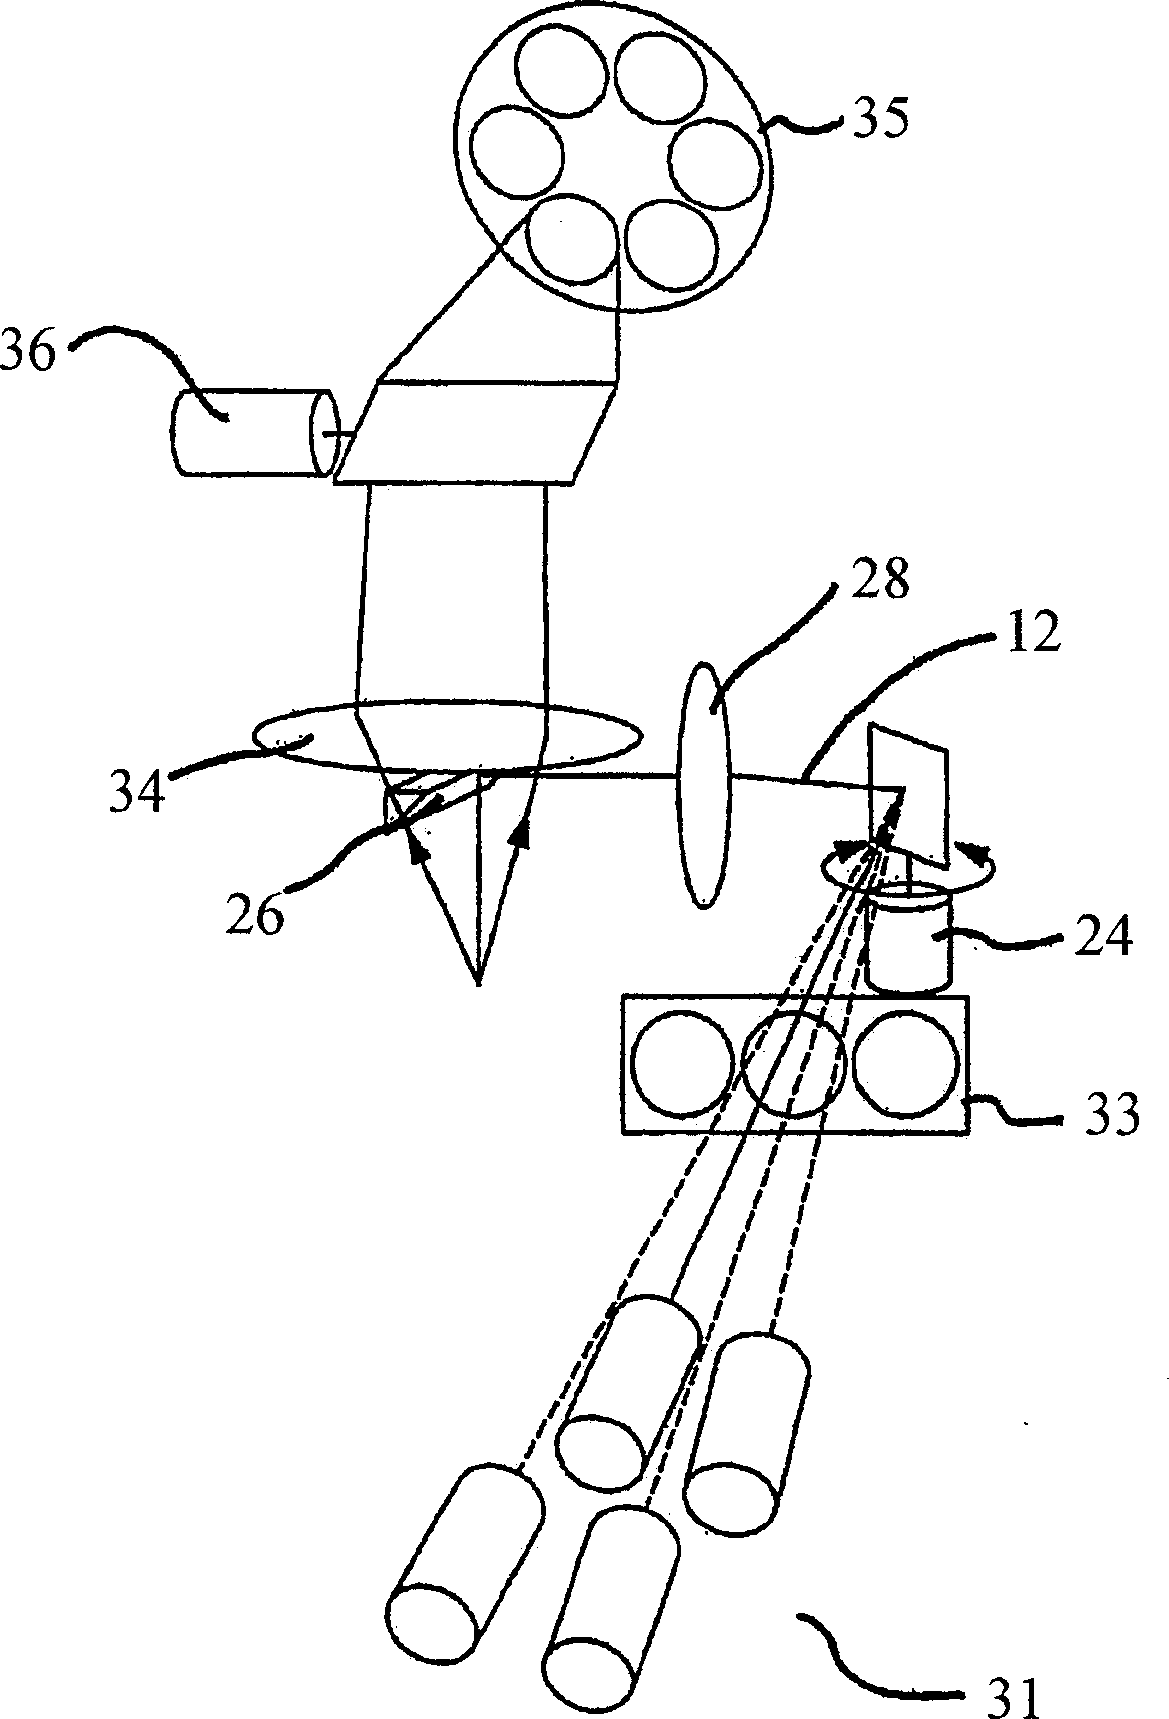 Time discrimination optics imaging method and equipment used for part biological tissues of animal body